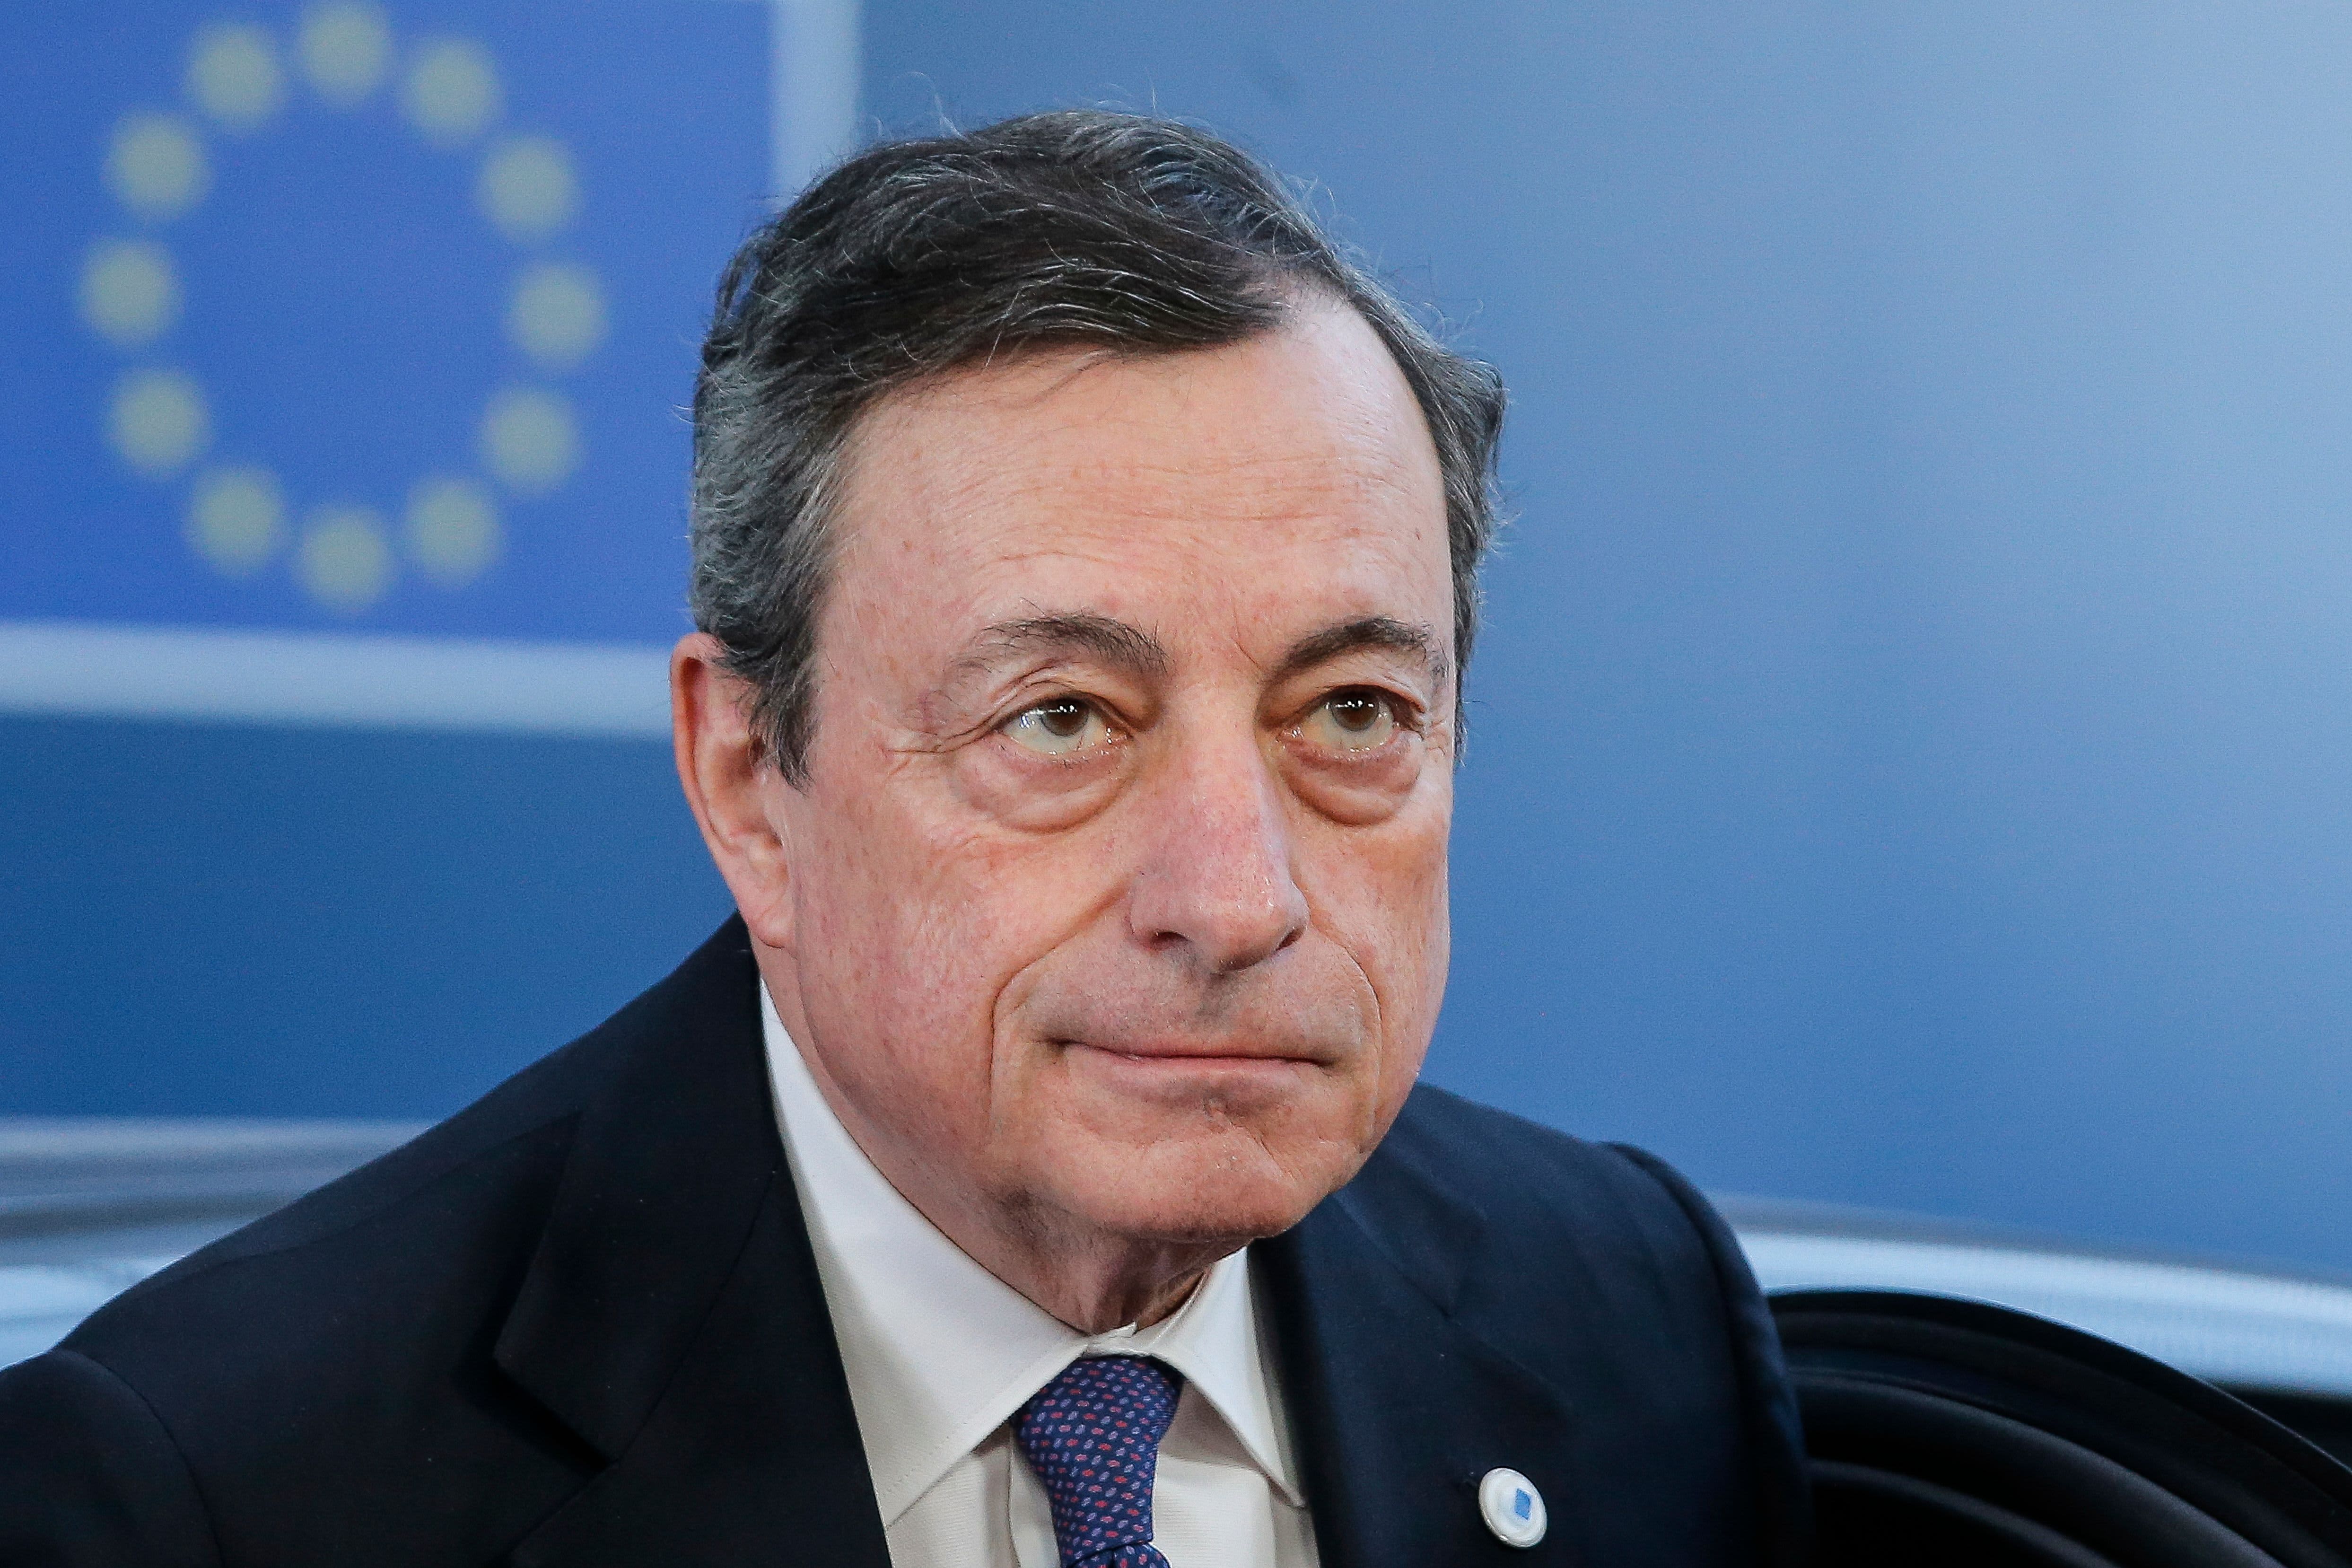 European Central Bank cuts its deposit rate, launches new bond-buying program